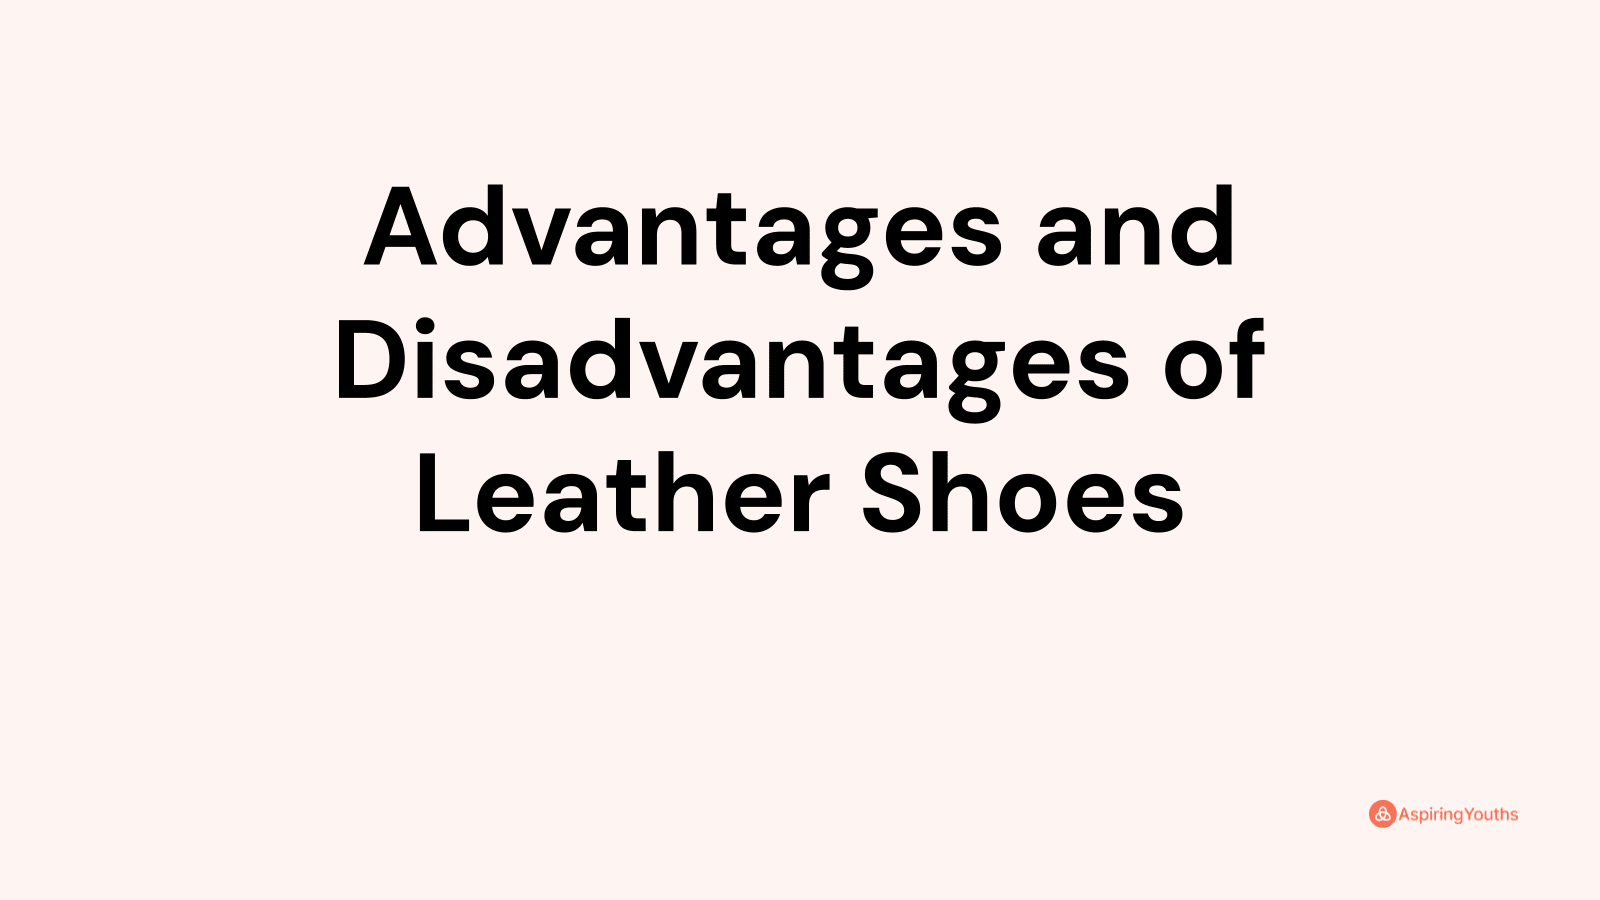 Advantages and disadvantages of Leather Shoes